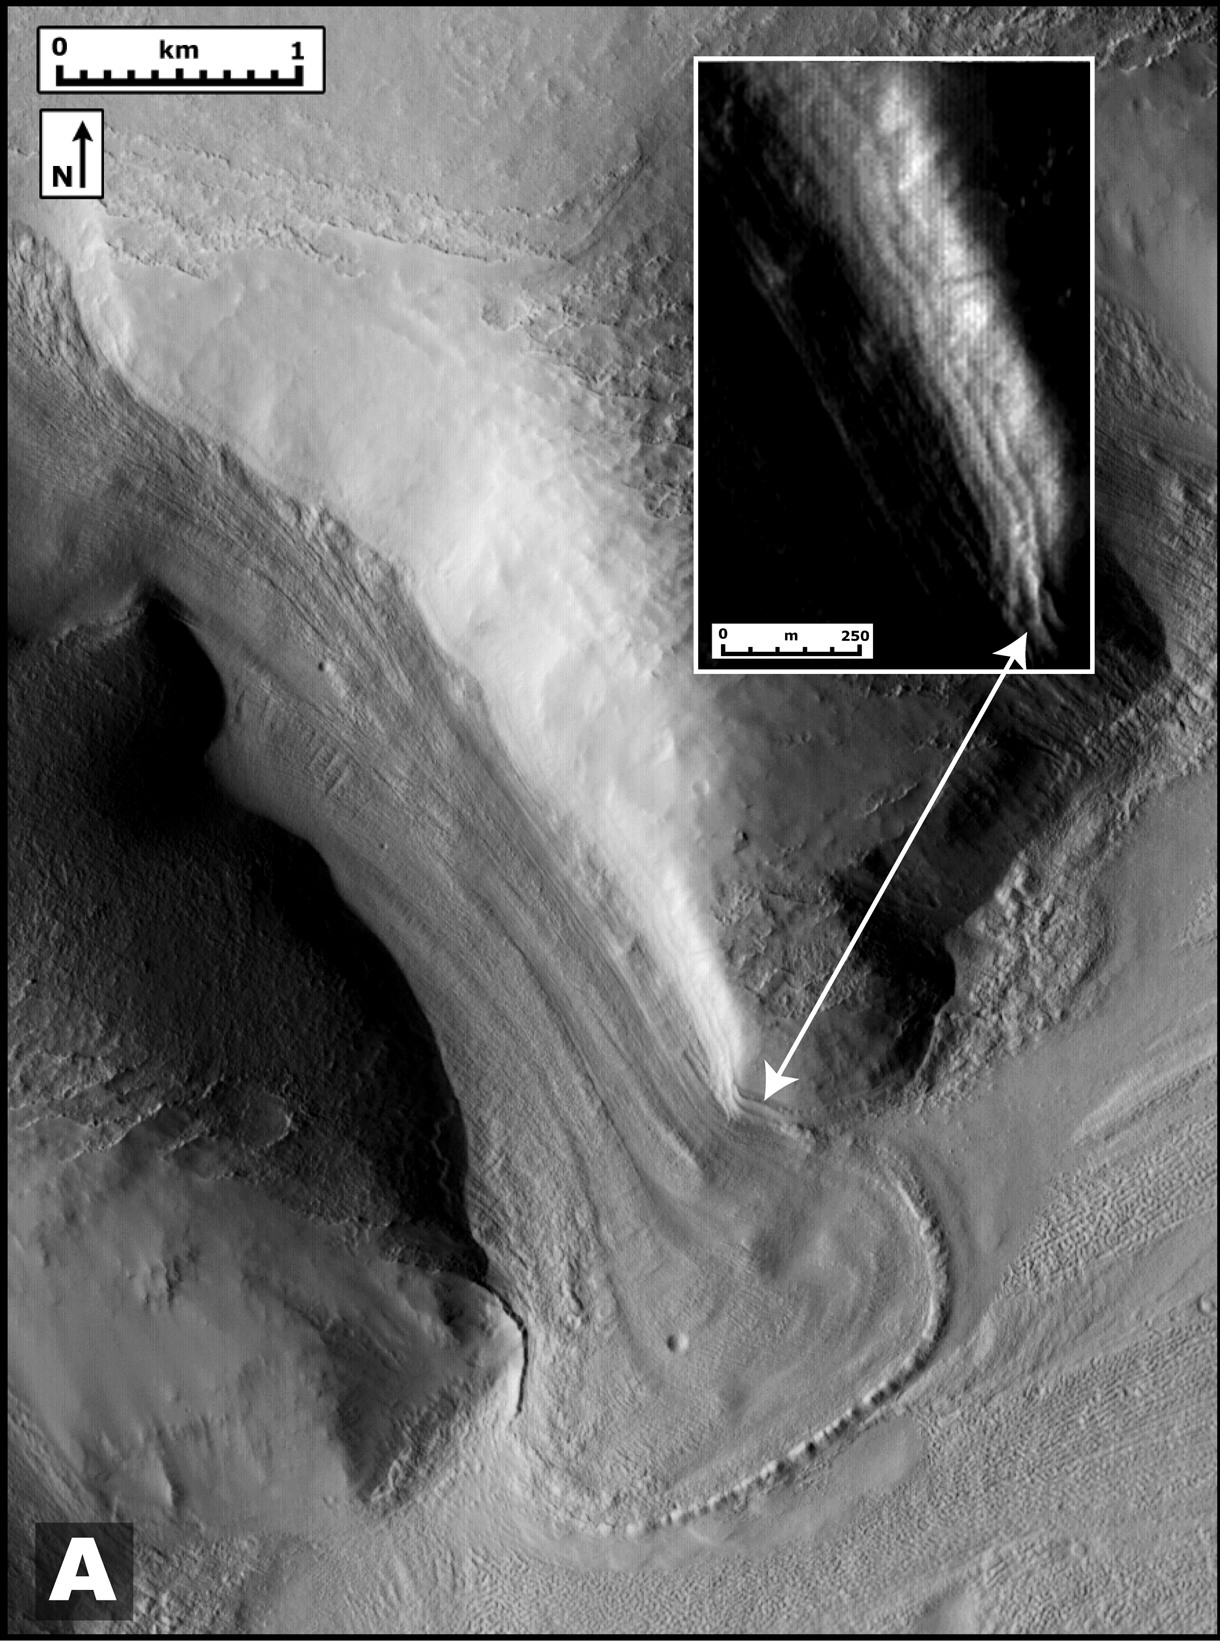 Ancient Martian Tributary: This image taken taken by the Mars Reconnaissance Orbiter shows a glacier-like lobe that had spilled from an ancient tributary on to the surrounding plain. Brown scientists report in May's issue of Geology that the lobe is superimposed on a past ice deposit and appears to be evidence of more recent glaciation.